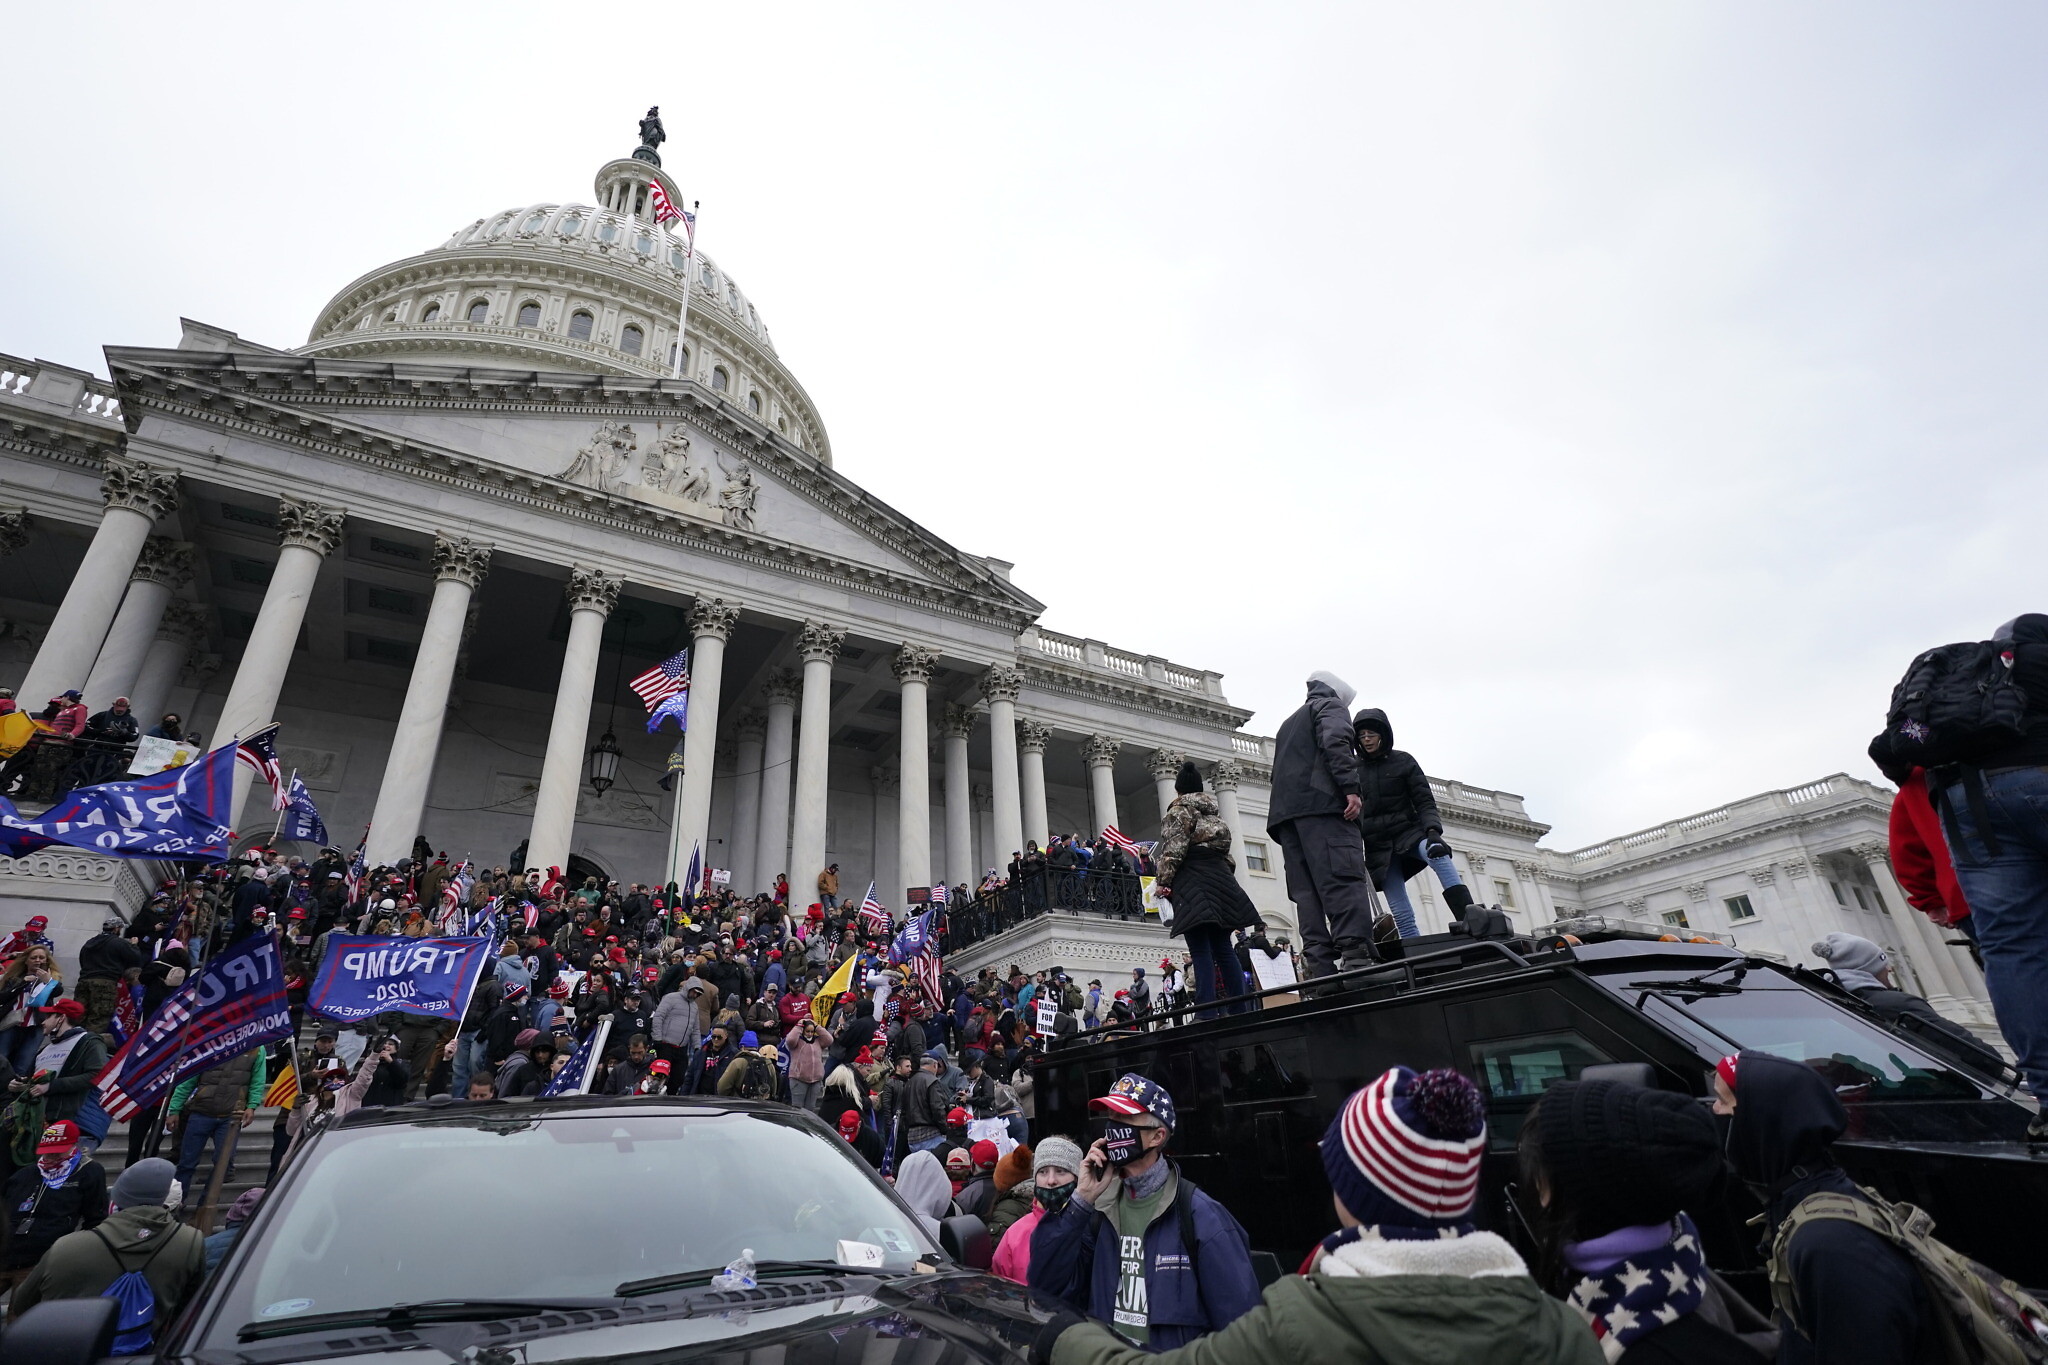 Trump supporters stand on top of a police vehicle, Wednesday, Jan. 6, 2021, at the Capitol in Washington. (AP Photo/Julio Cortez)